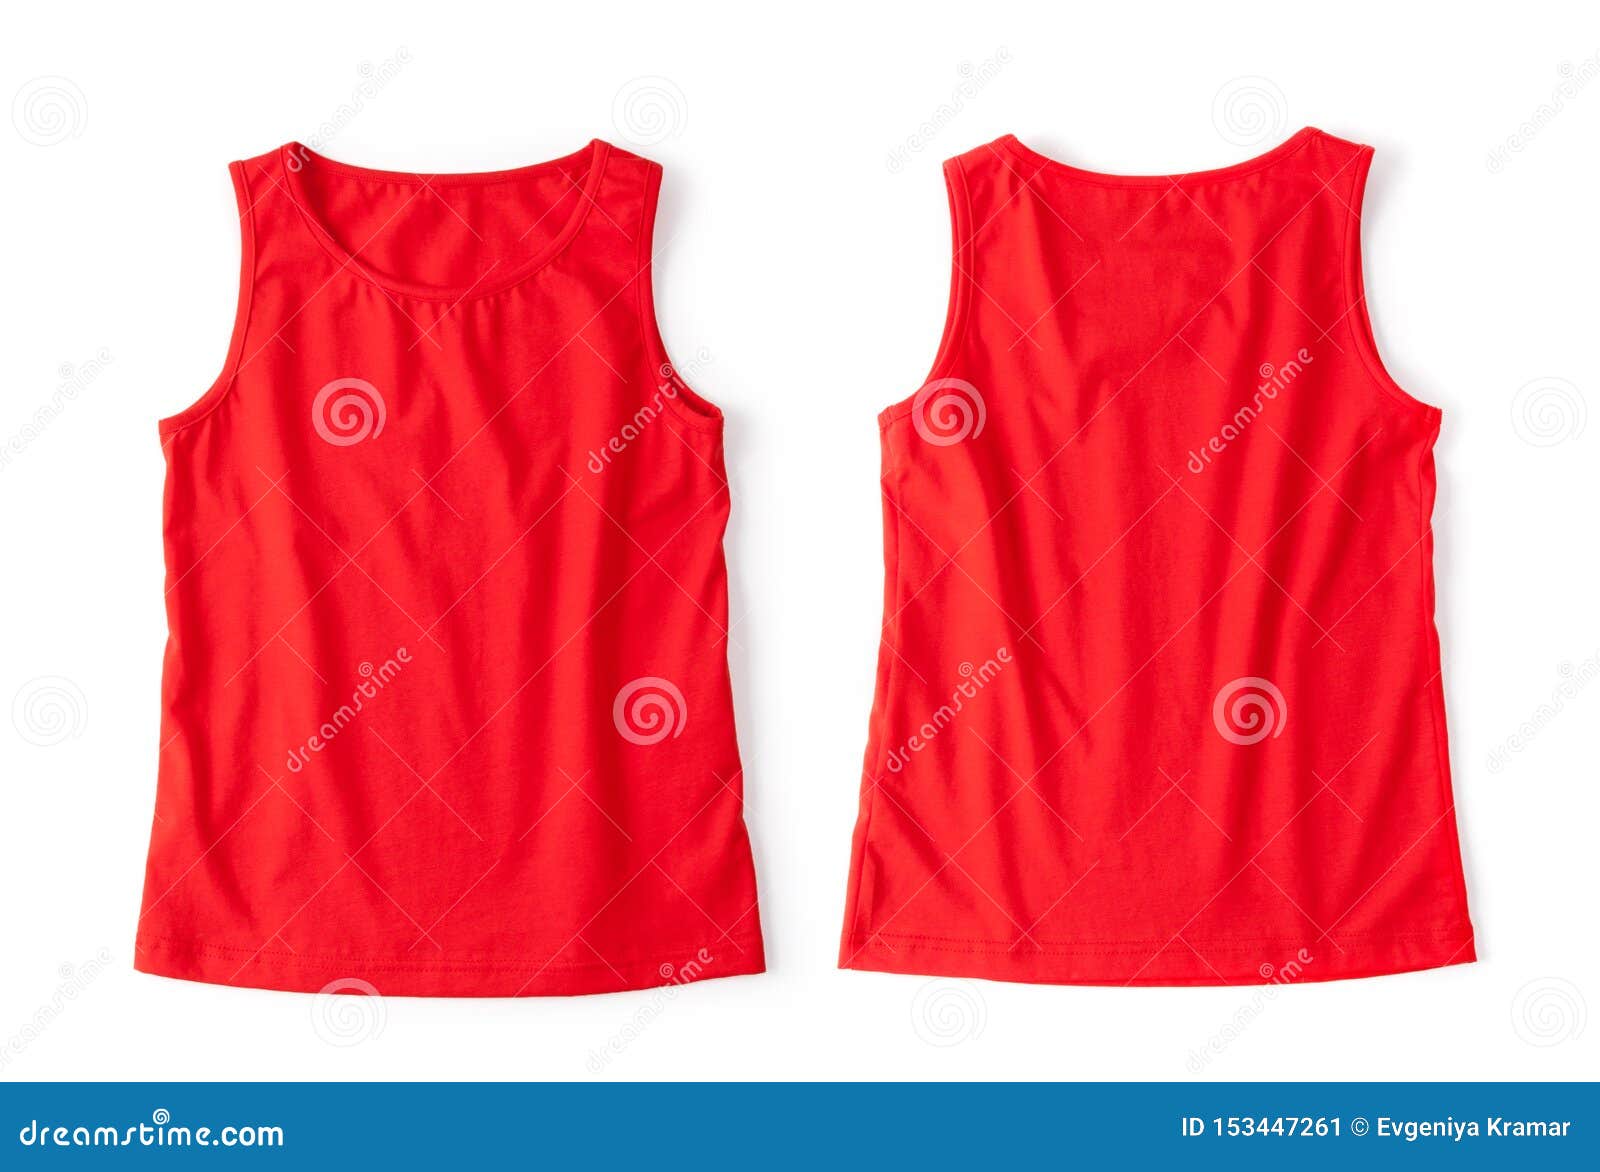 Red T-shirt Unfolded on a White Background Stock Image - Image of ...